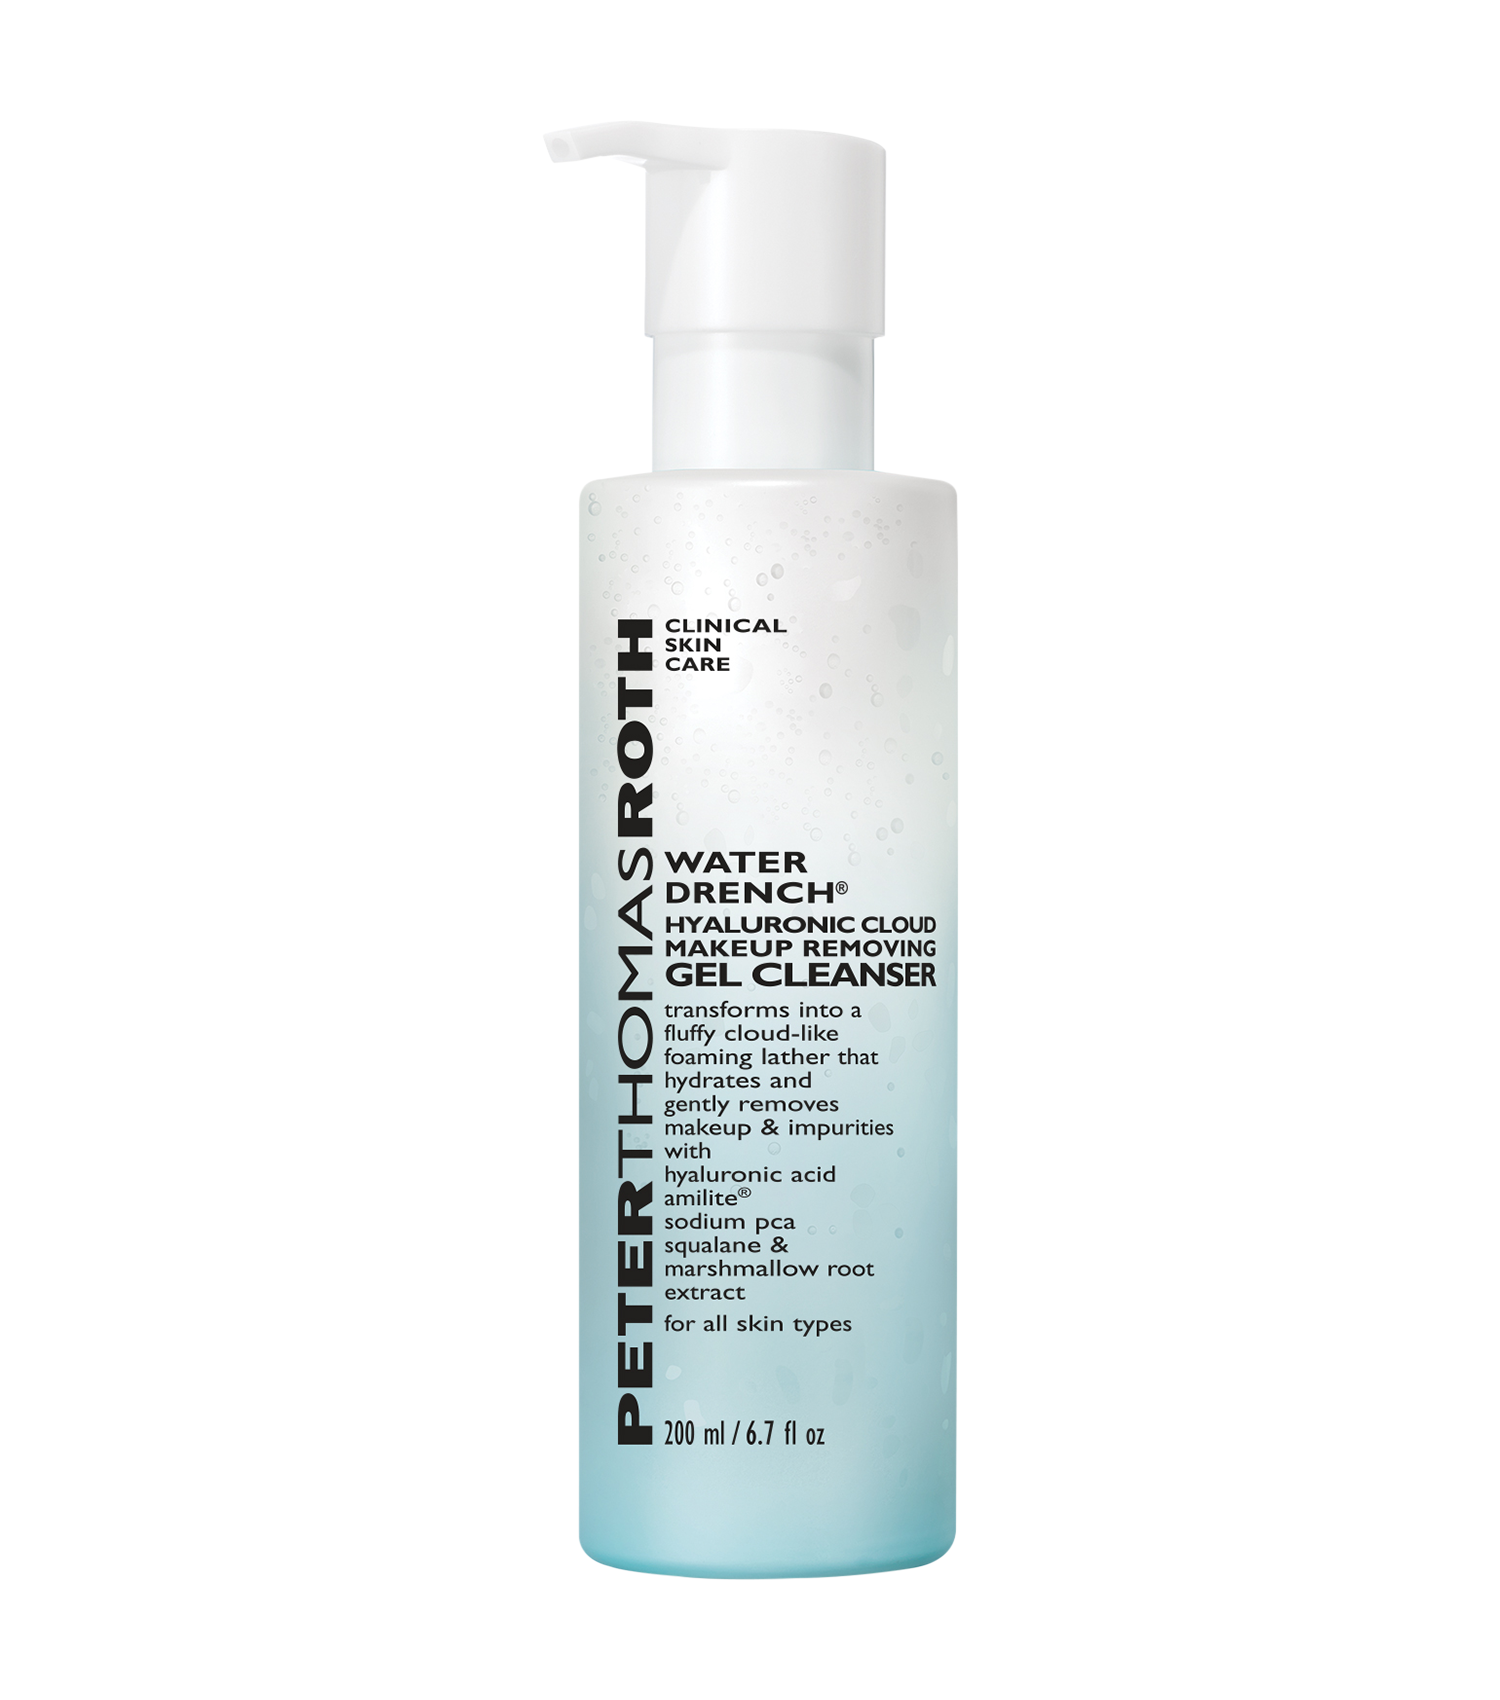 PETER THOMAS ROTH Water Drench Hyaluronic Cloud Makeup Removing Gel Cleanser PETER THOMAS ROTH Water Drench Hyaluronic Cloud Makeup Removing Gel Cleanser 1